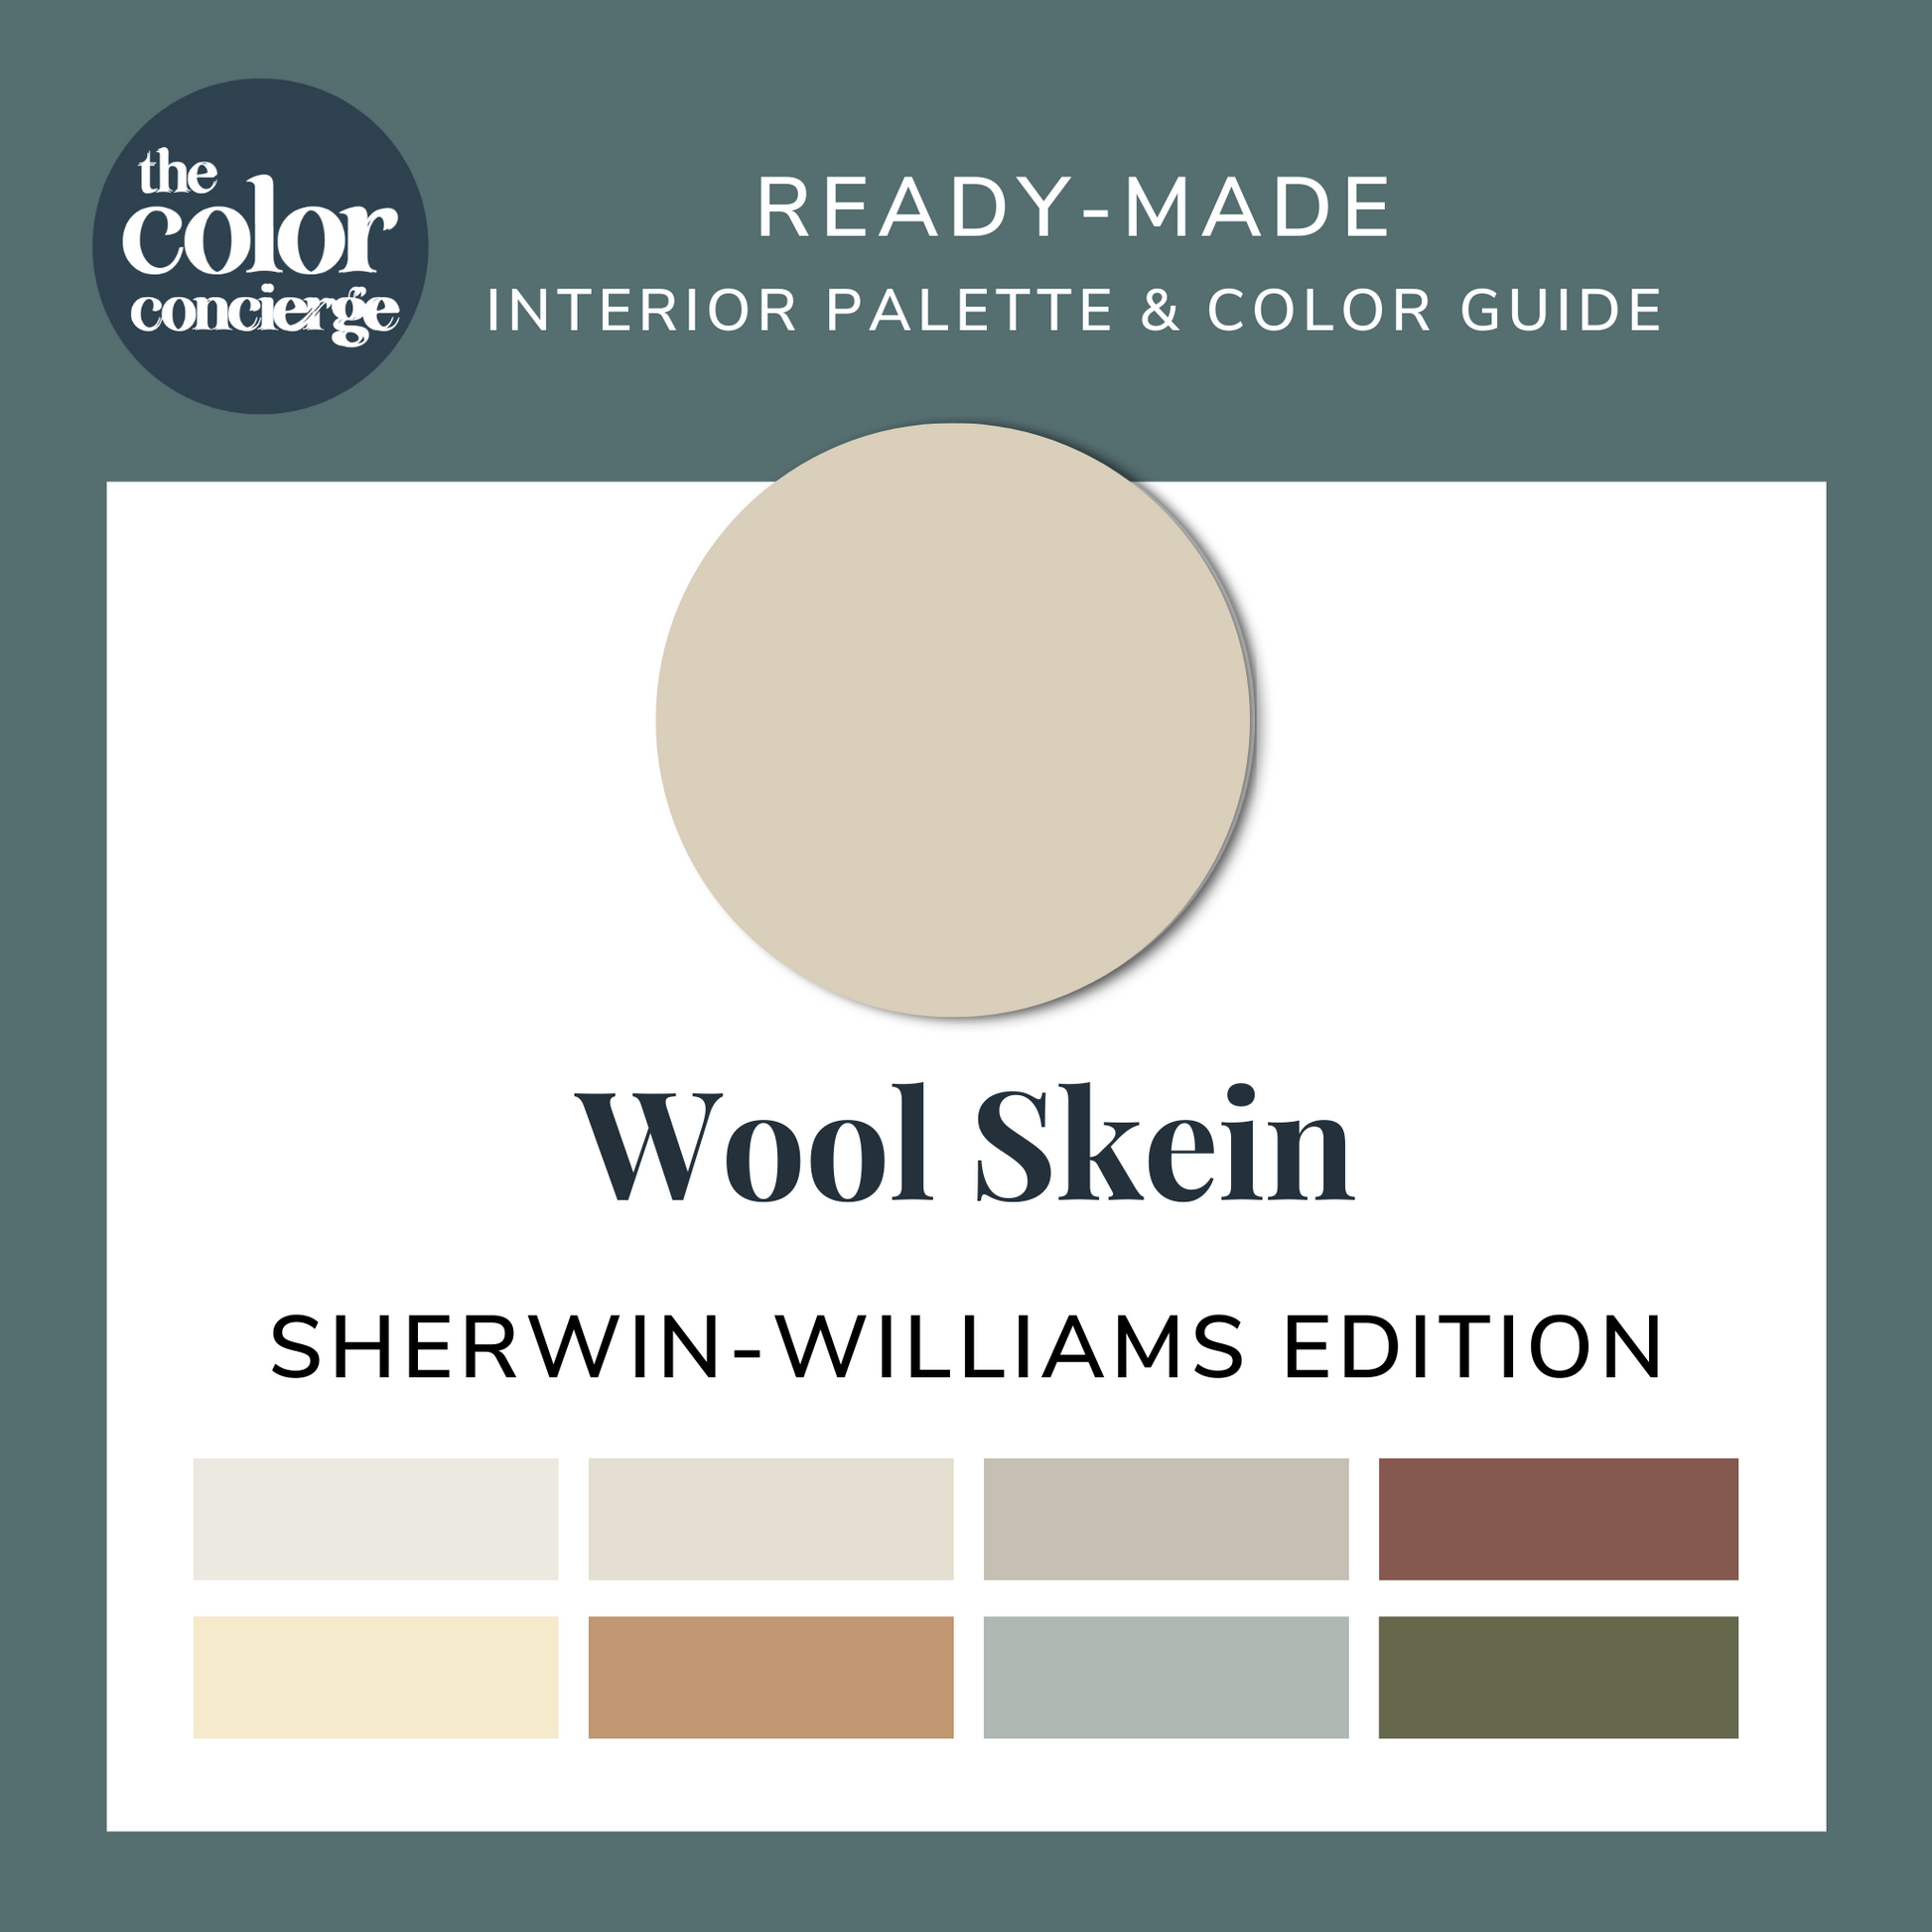 Sherwin-Williams Wool Skein color palette guide